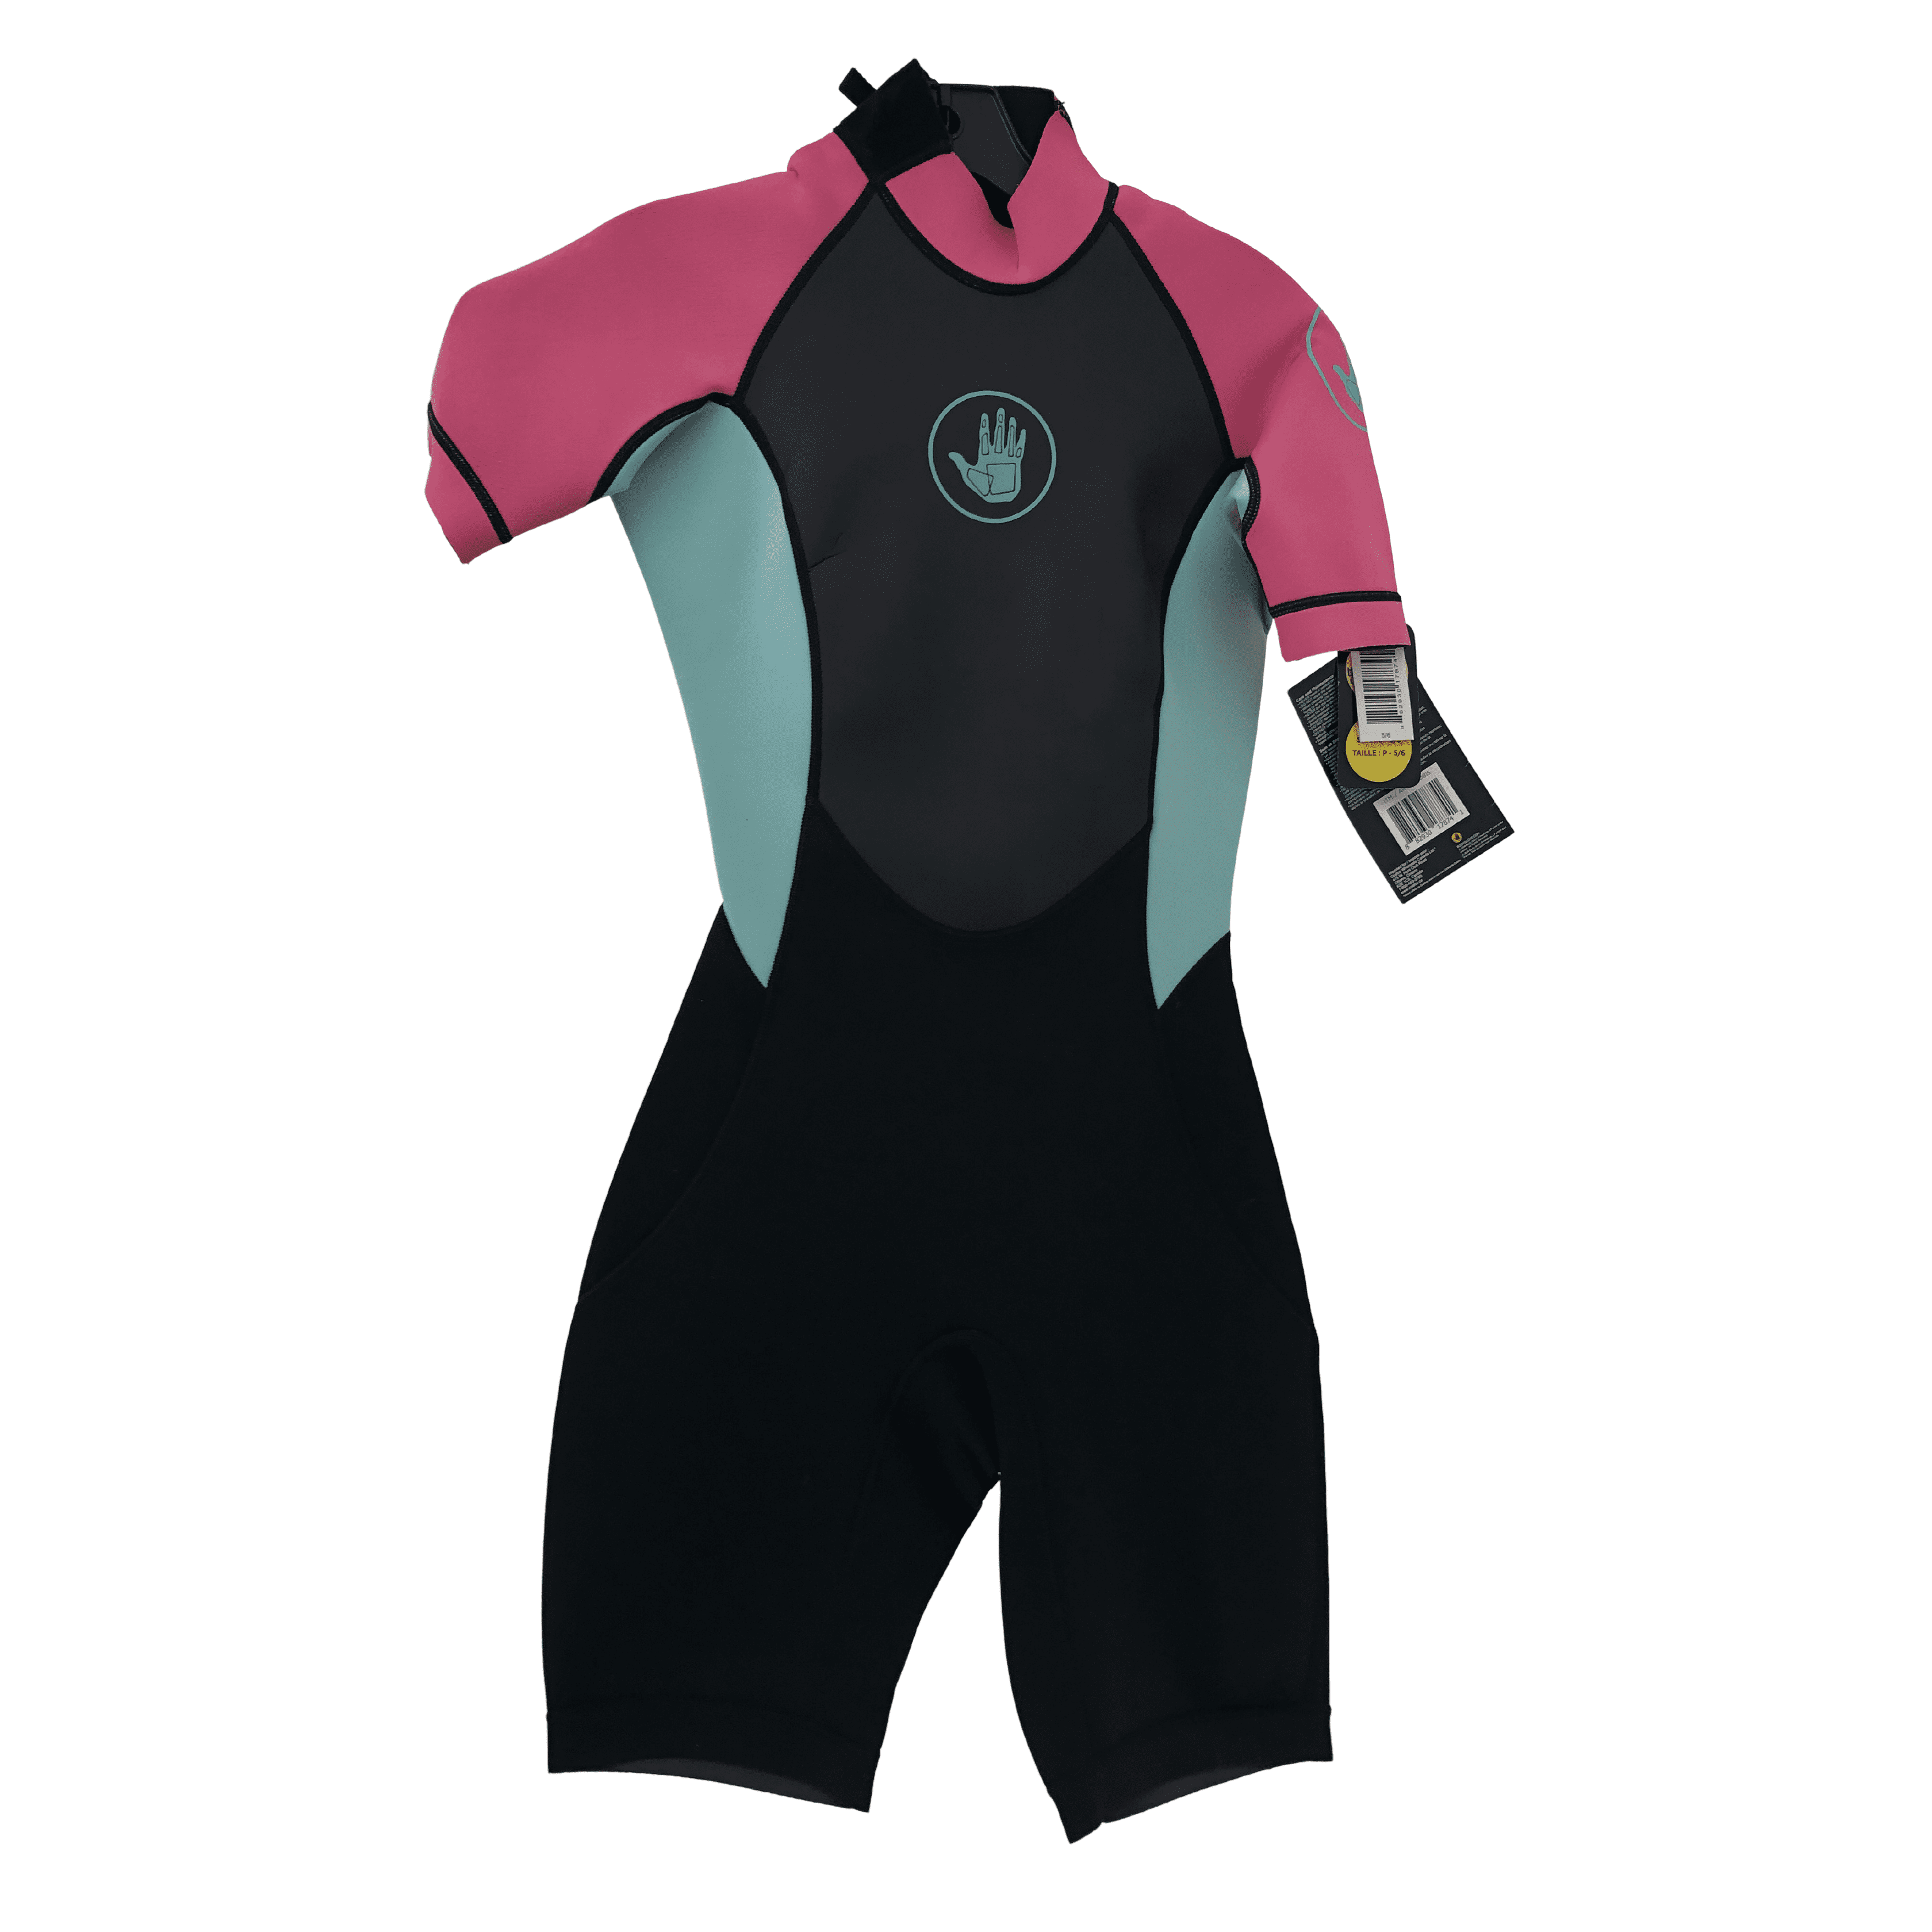 Body Glove Women's Wetsuit / Springsuit / Size: Small 5/6 / Black/Pink